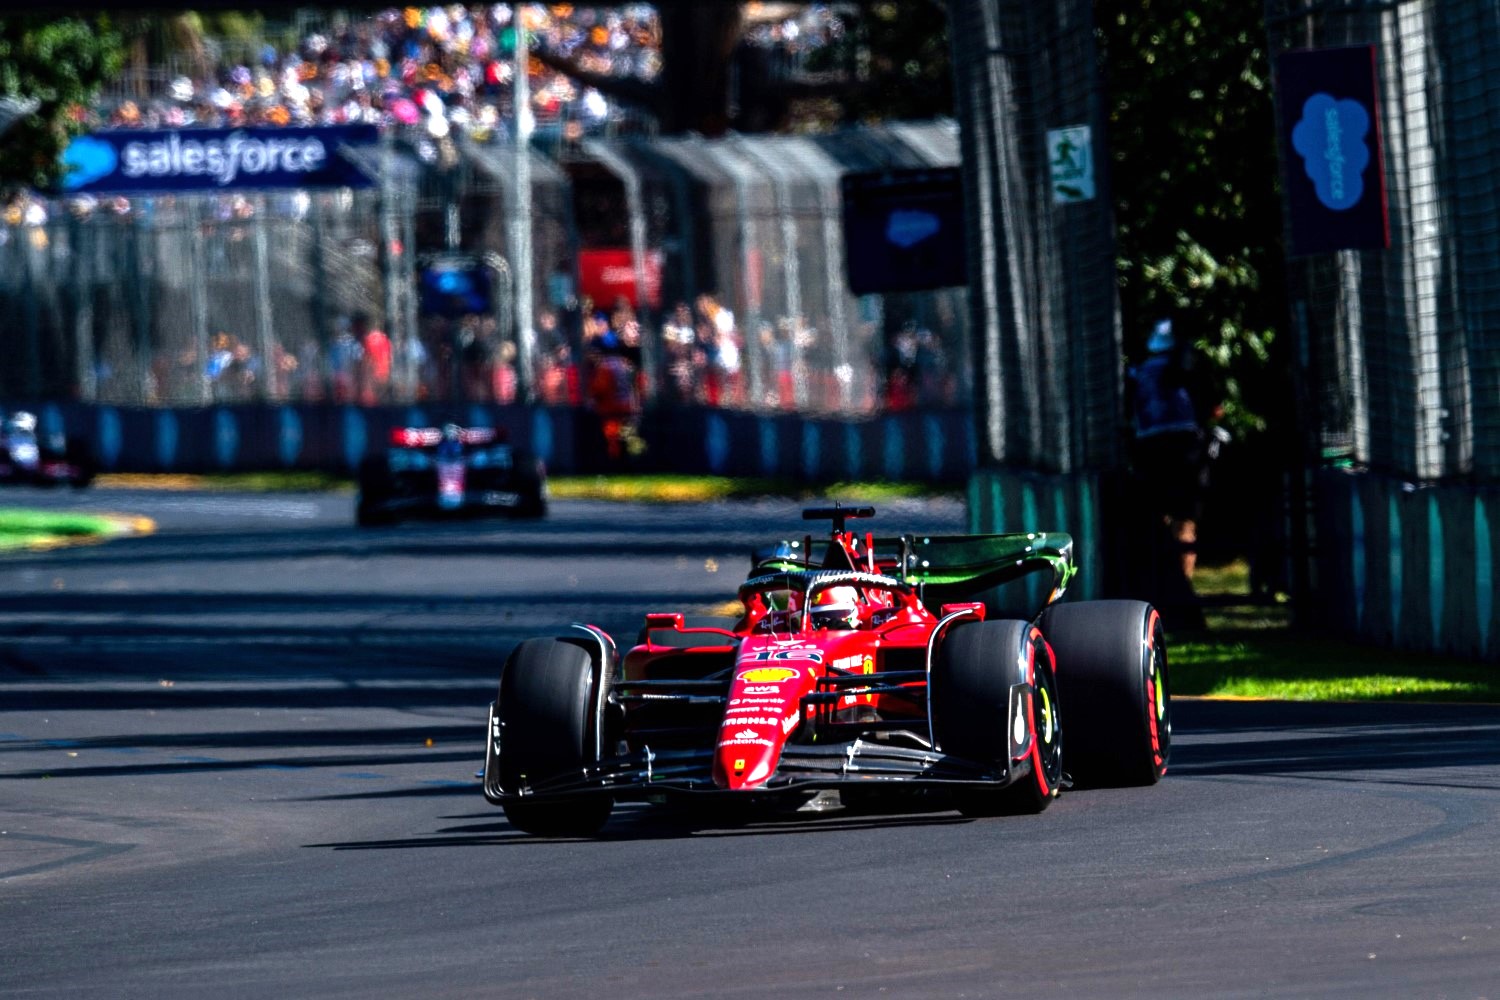 F1 Preview: Over 120,000 tickets already sold for Imola 